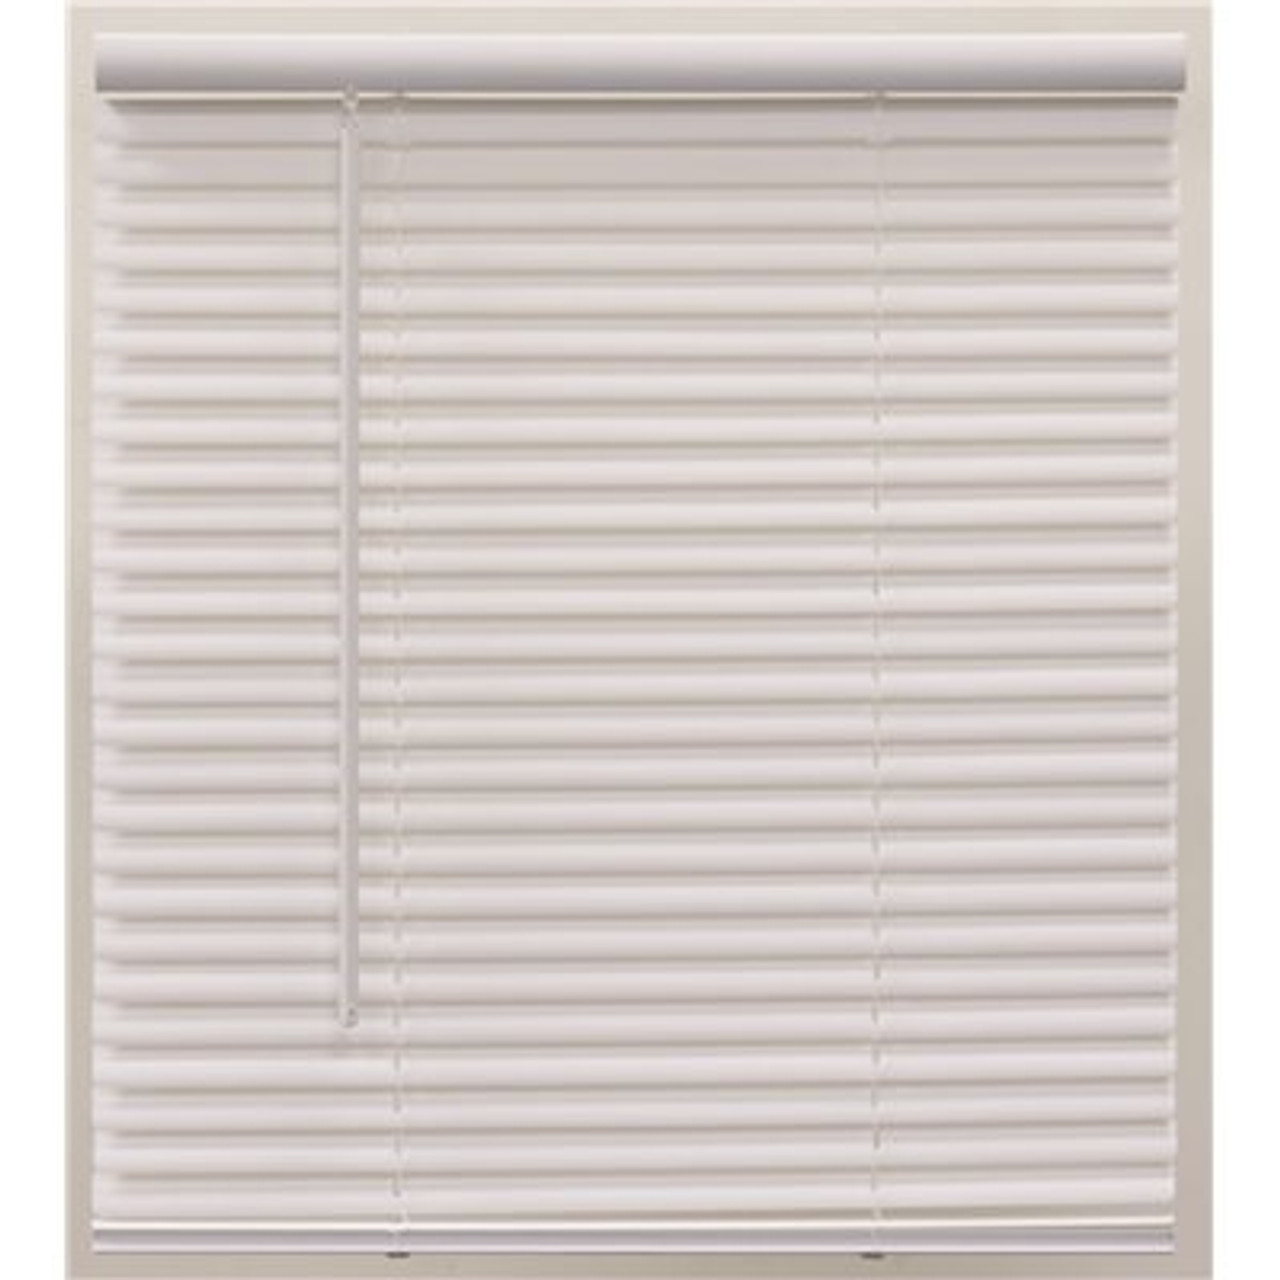 Champion Pre-Cut 46 in. W x 28 in. L White Cordless Light Filtering Vinyl Mini Blind with 1 in. Slats